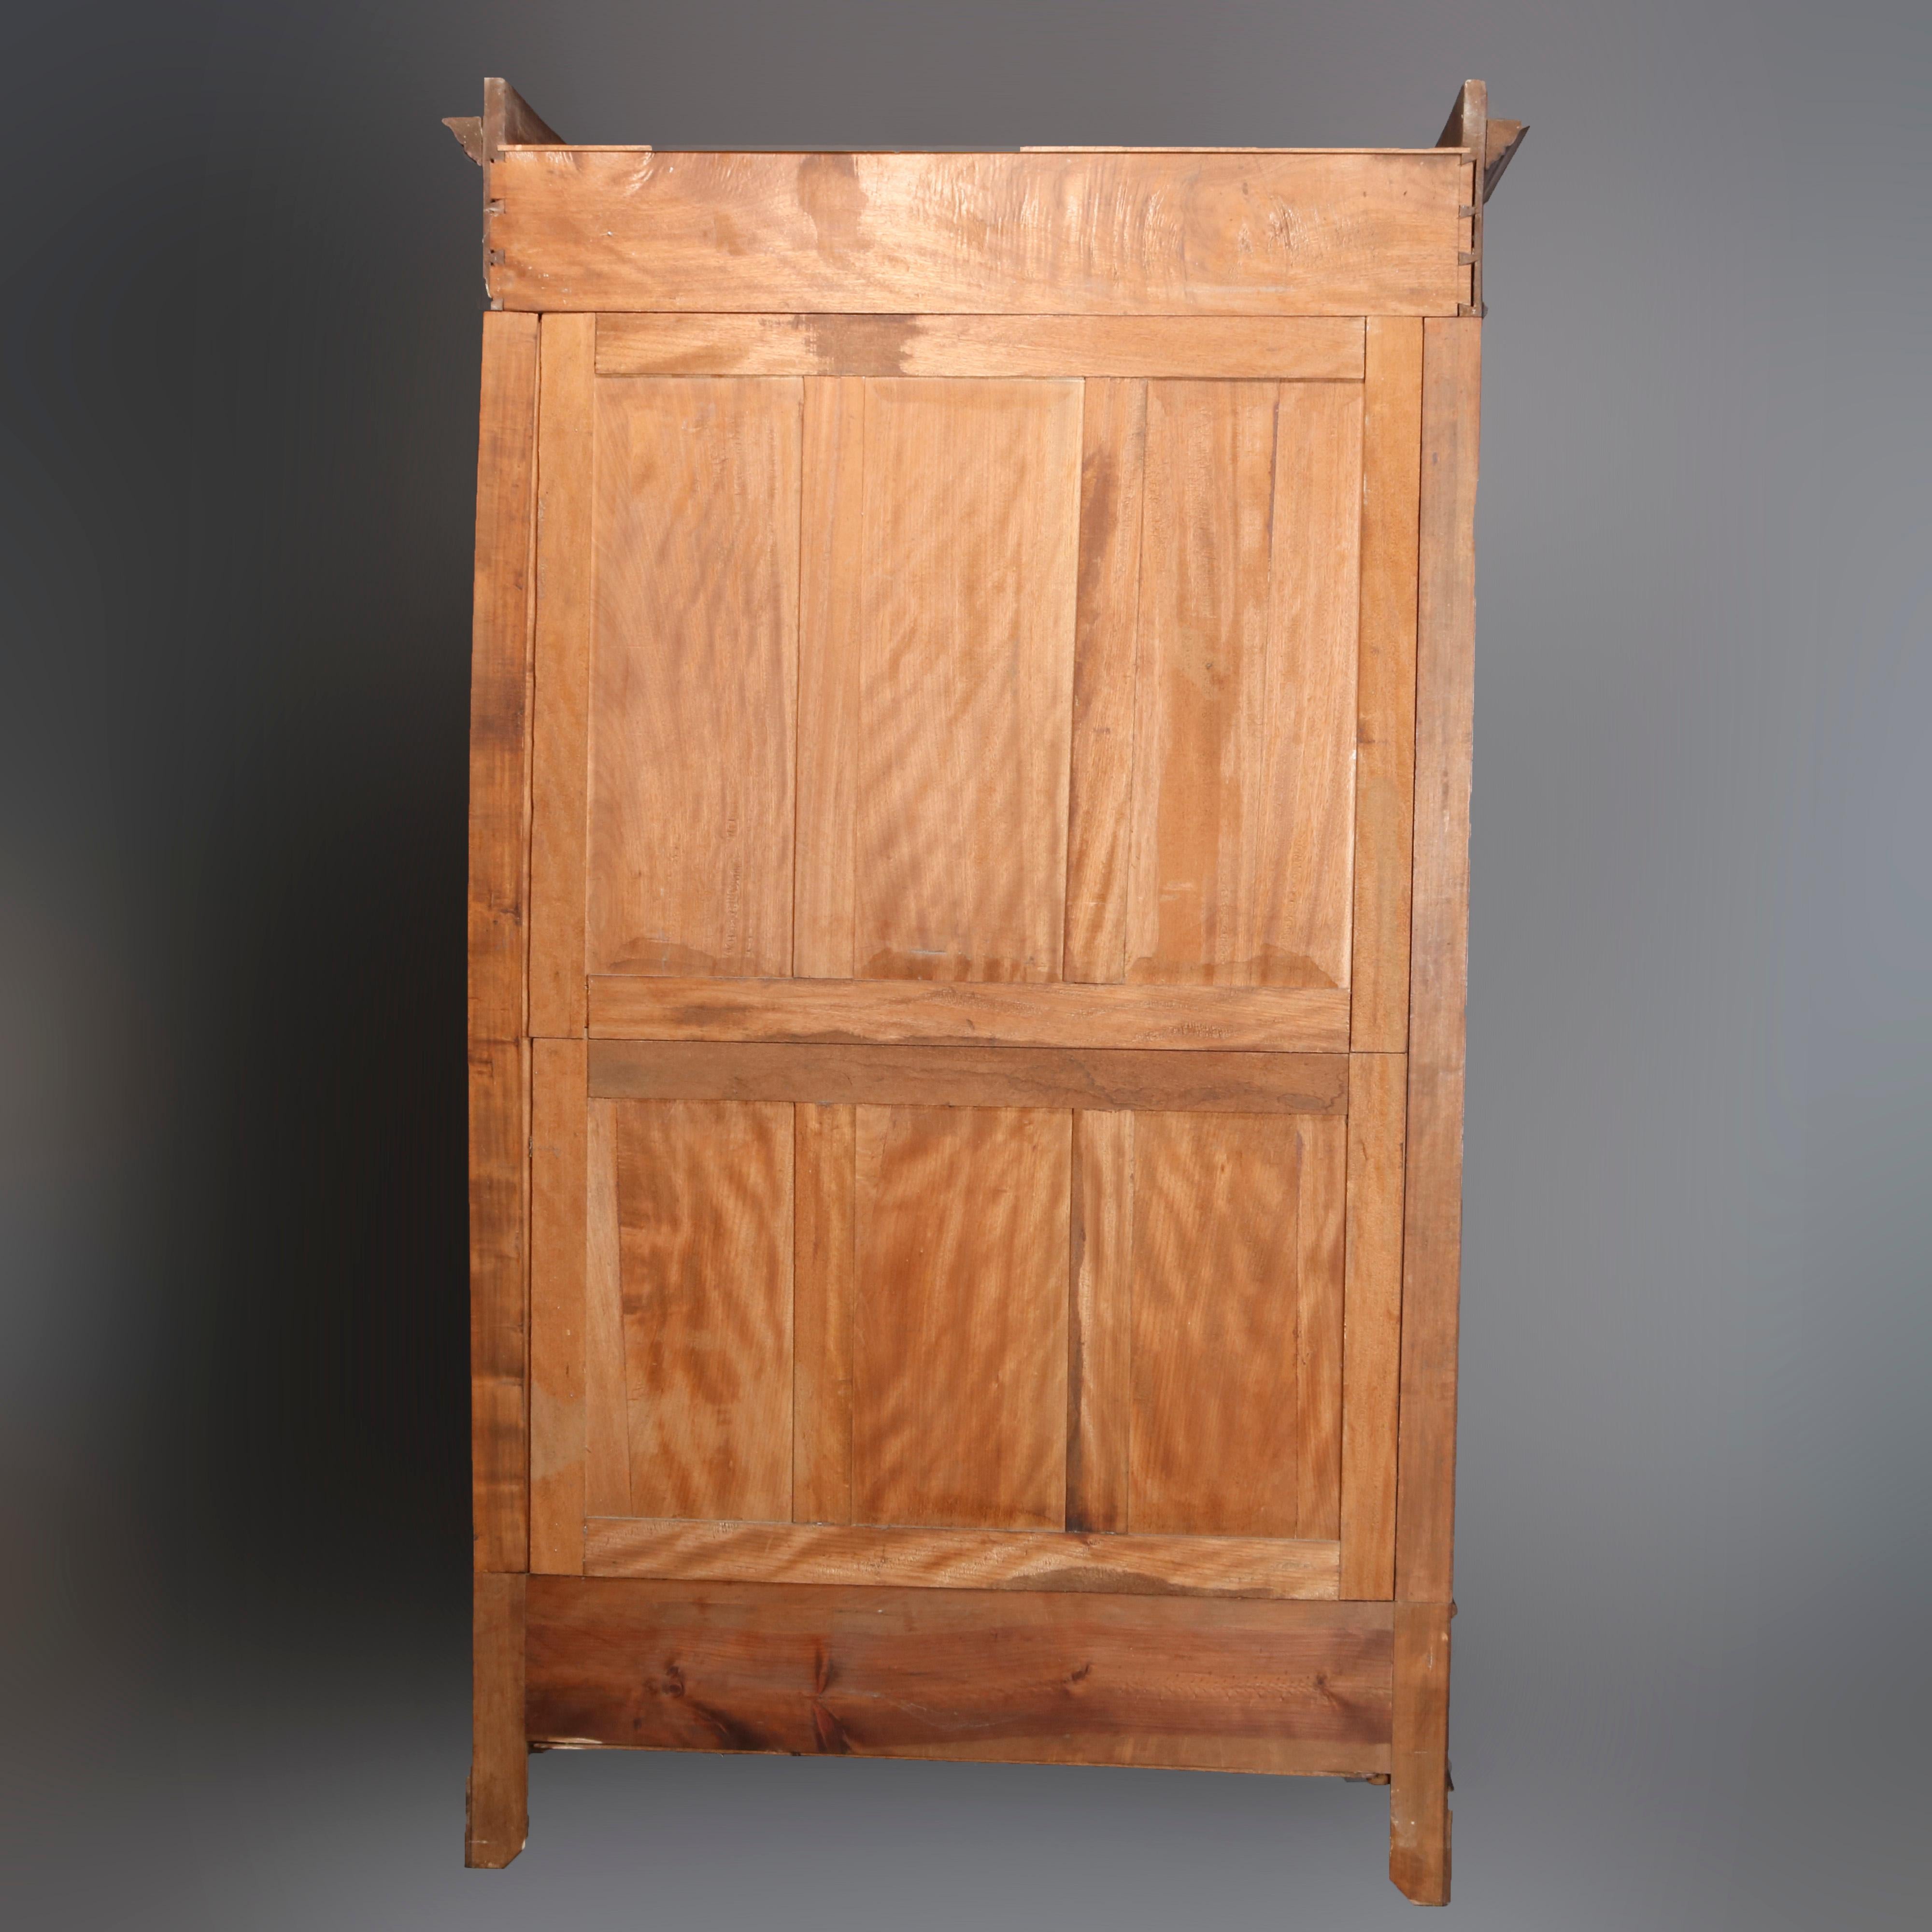 Beveled Antique French Renaissance Carved Walnut Double Door Armoire, 19th Century